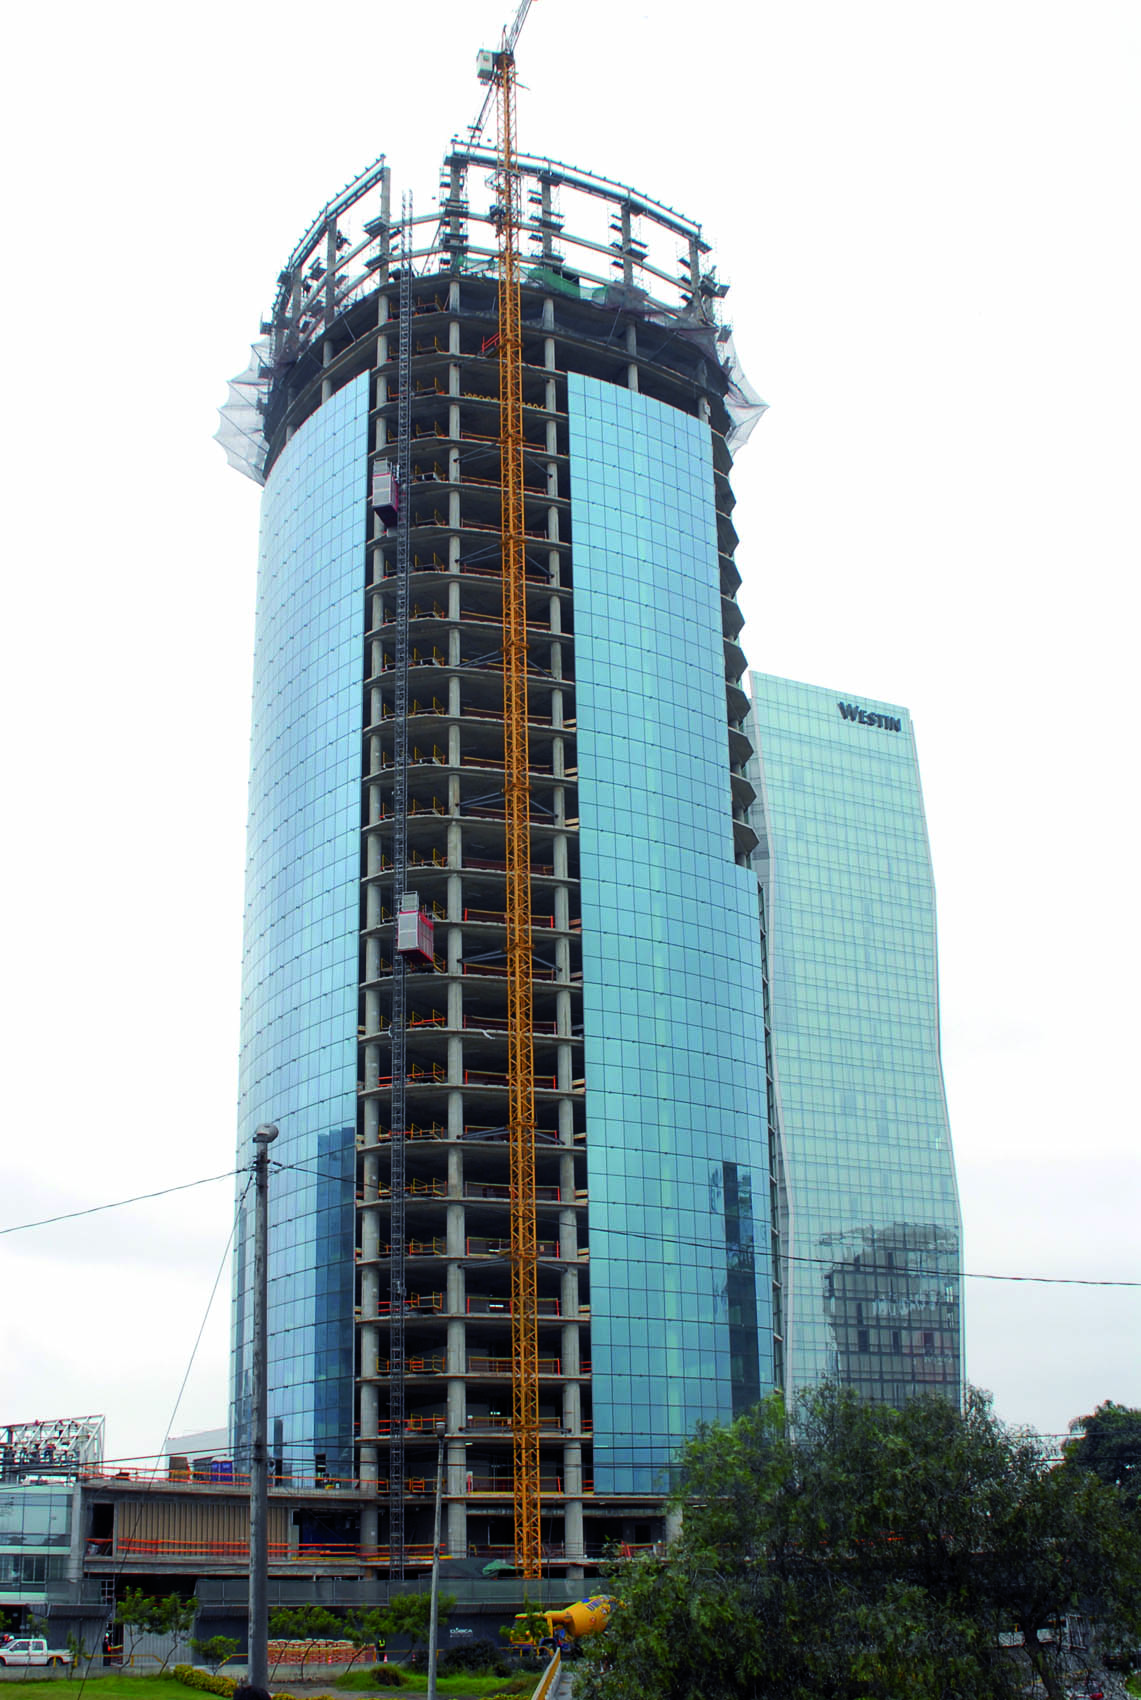 ALSINA'S FORMWORK SYSTEMS ATRACT HIGH BUILDINGS PROMOTERS ALL AROUND ...